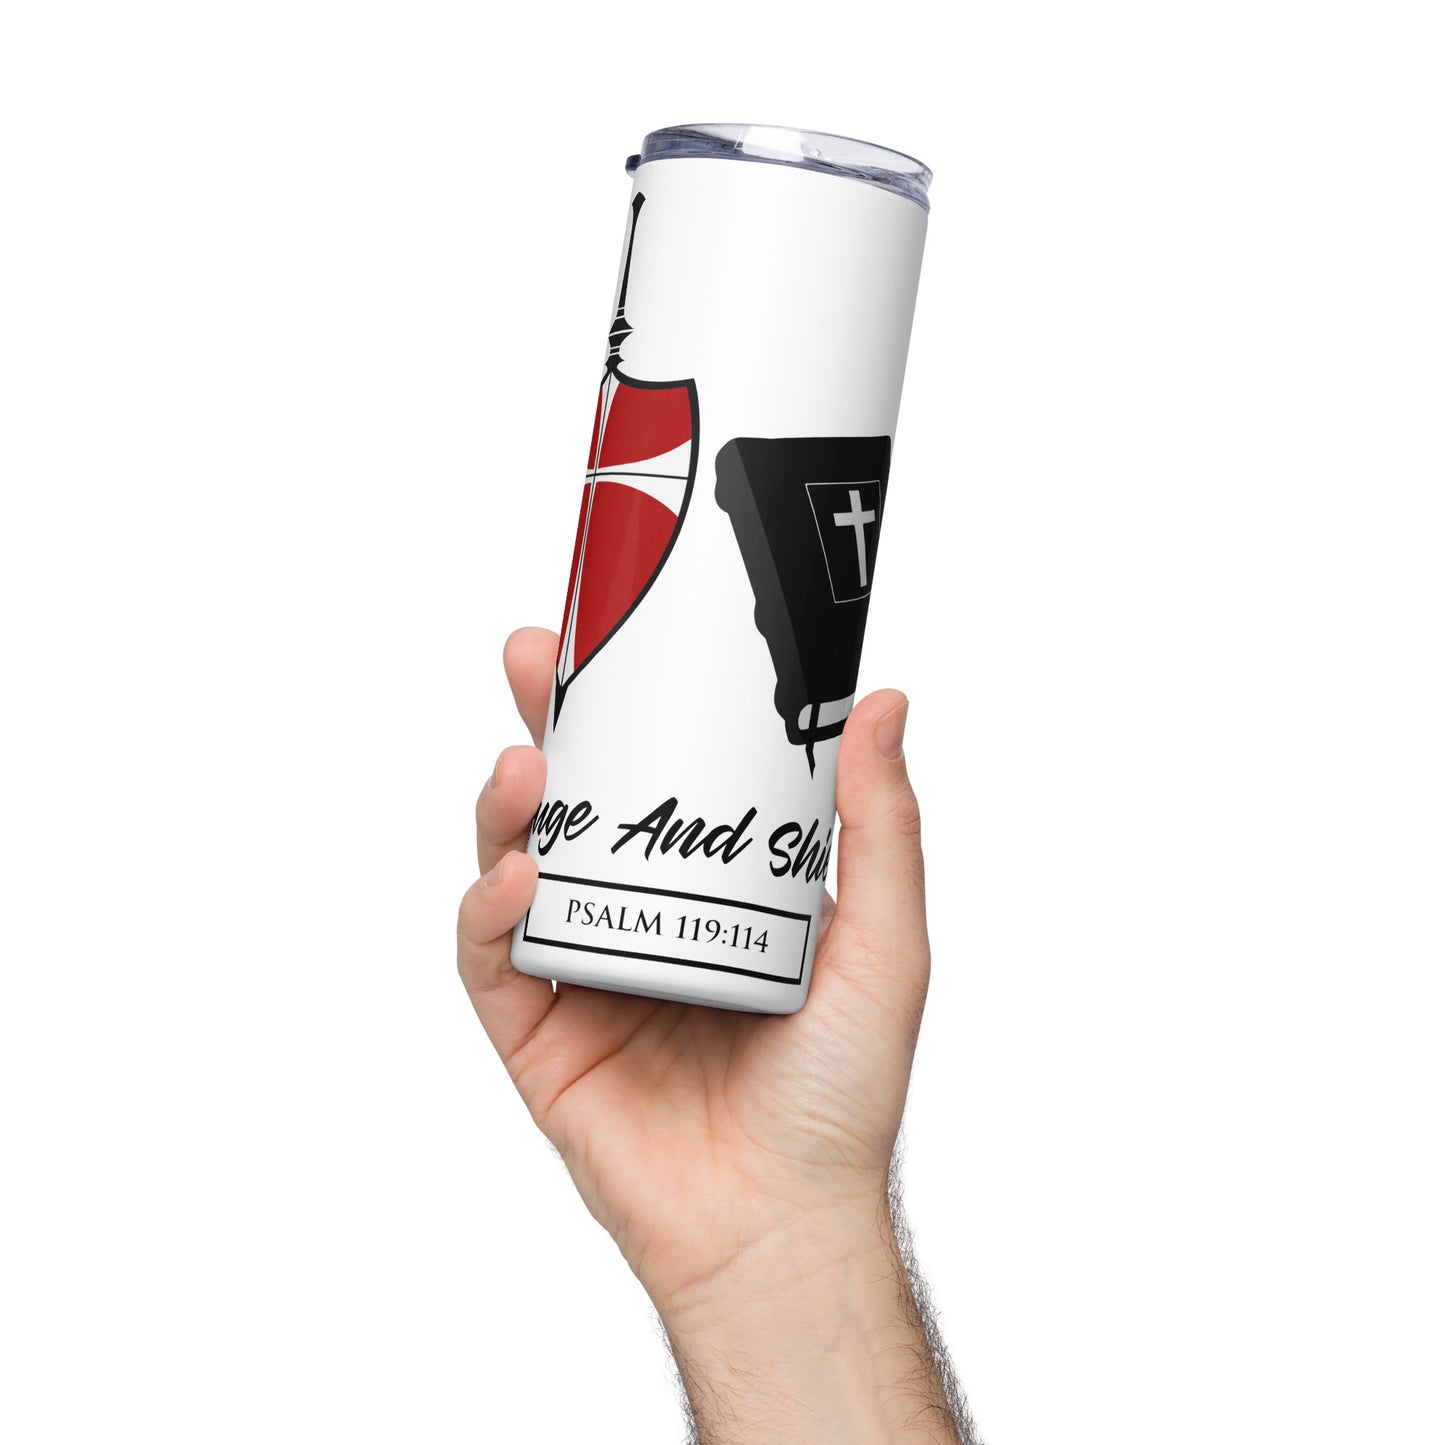 Refuge and Shield Stainless Steel Tumbler